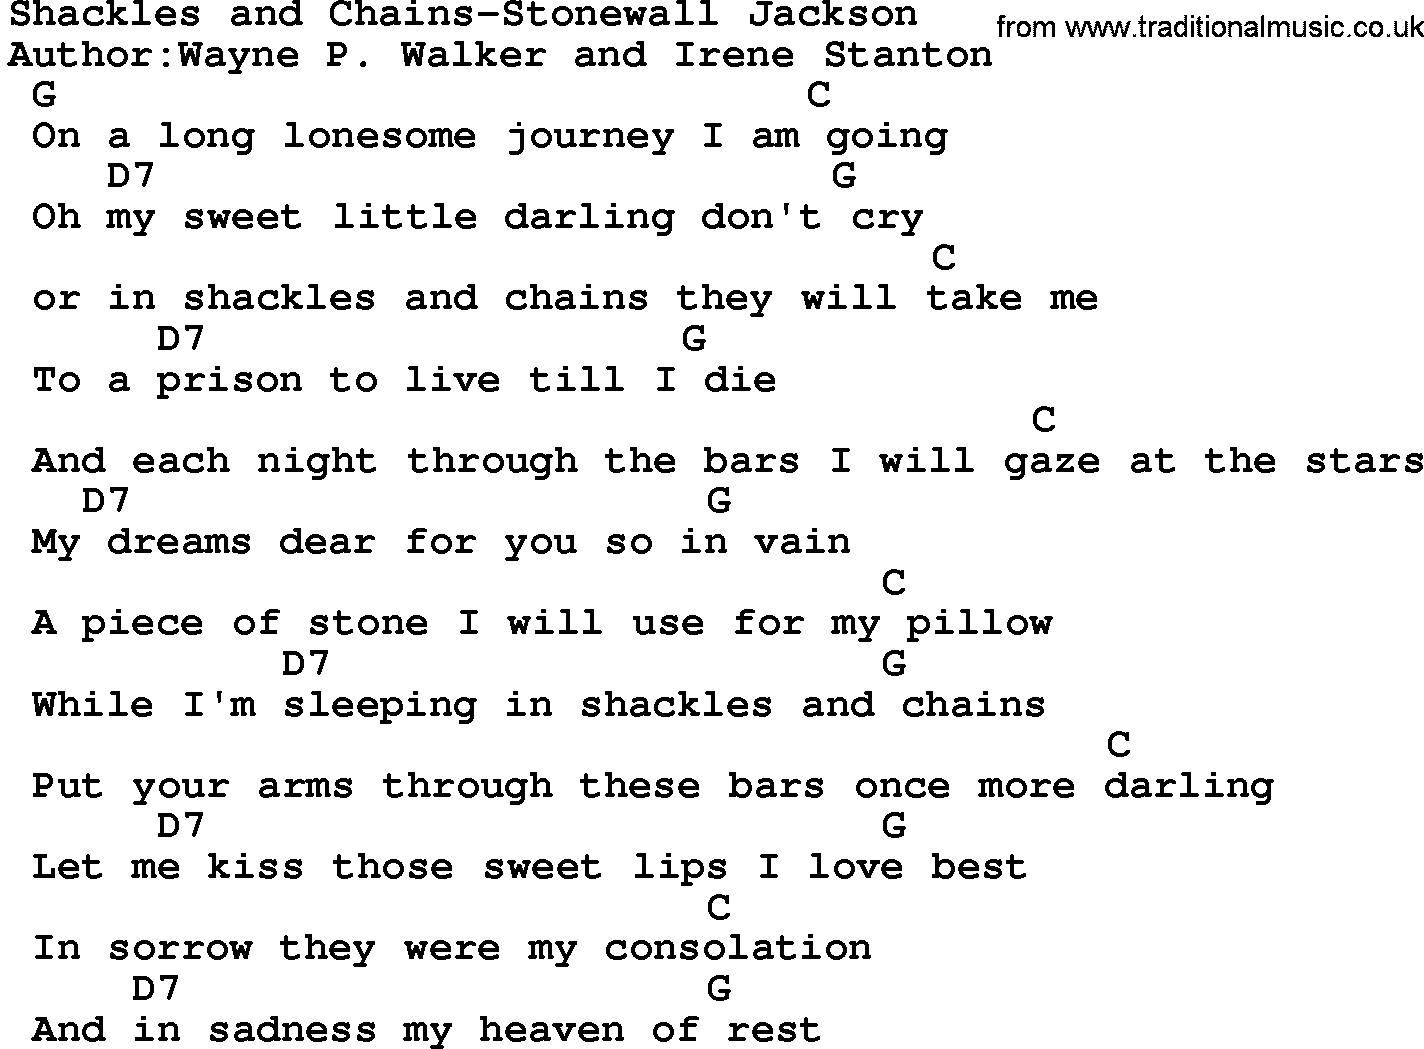 Country music song: Shackles And Chains-Stonewall Jackson lyrics and chords